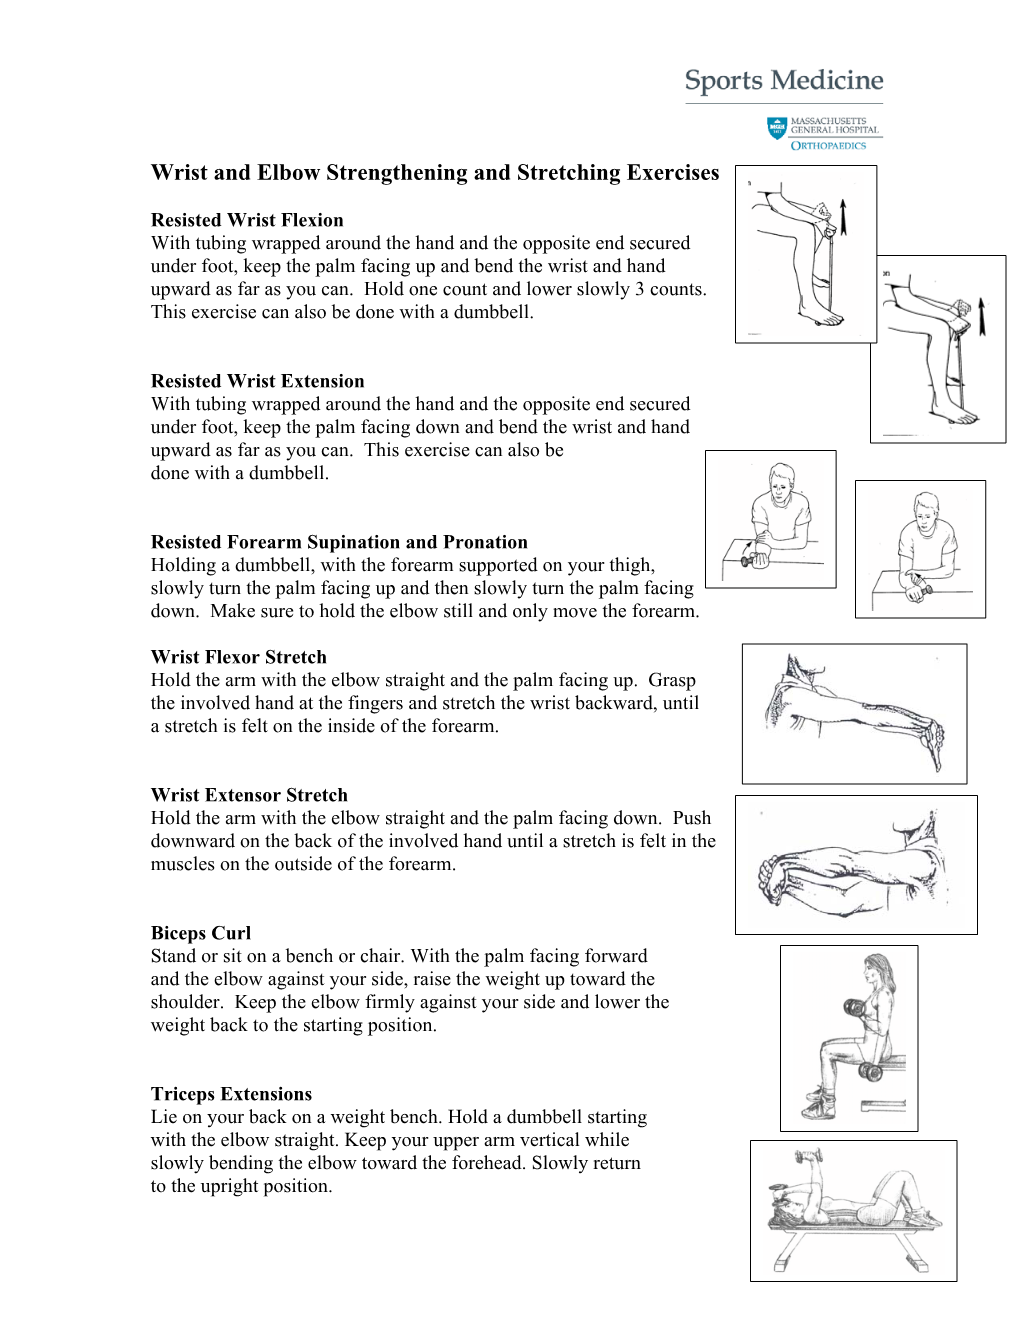 Wrist and Elbow Strengthening and Stretching Exercises